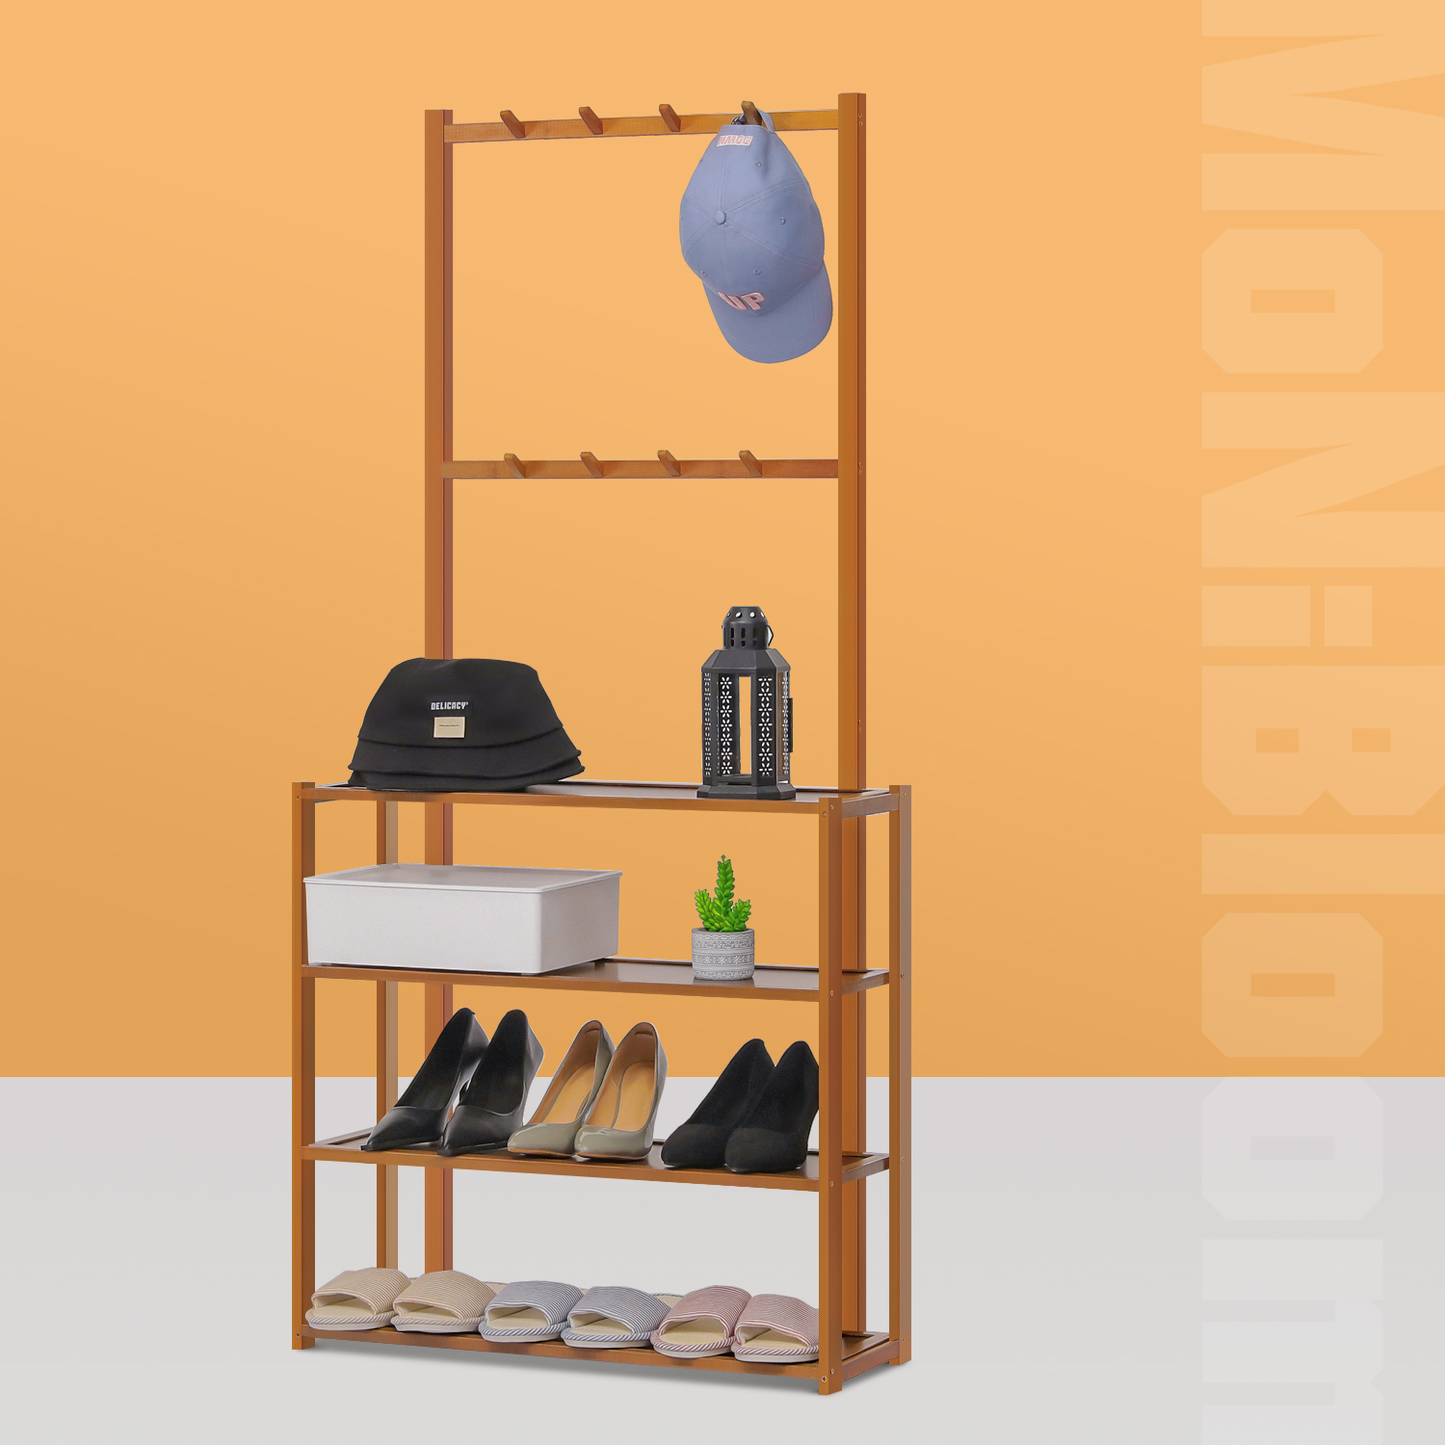 Entryway Coat Rack - with Accessories Storage Shelves - Brown